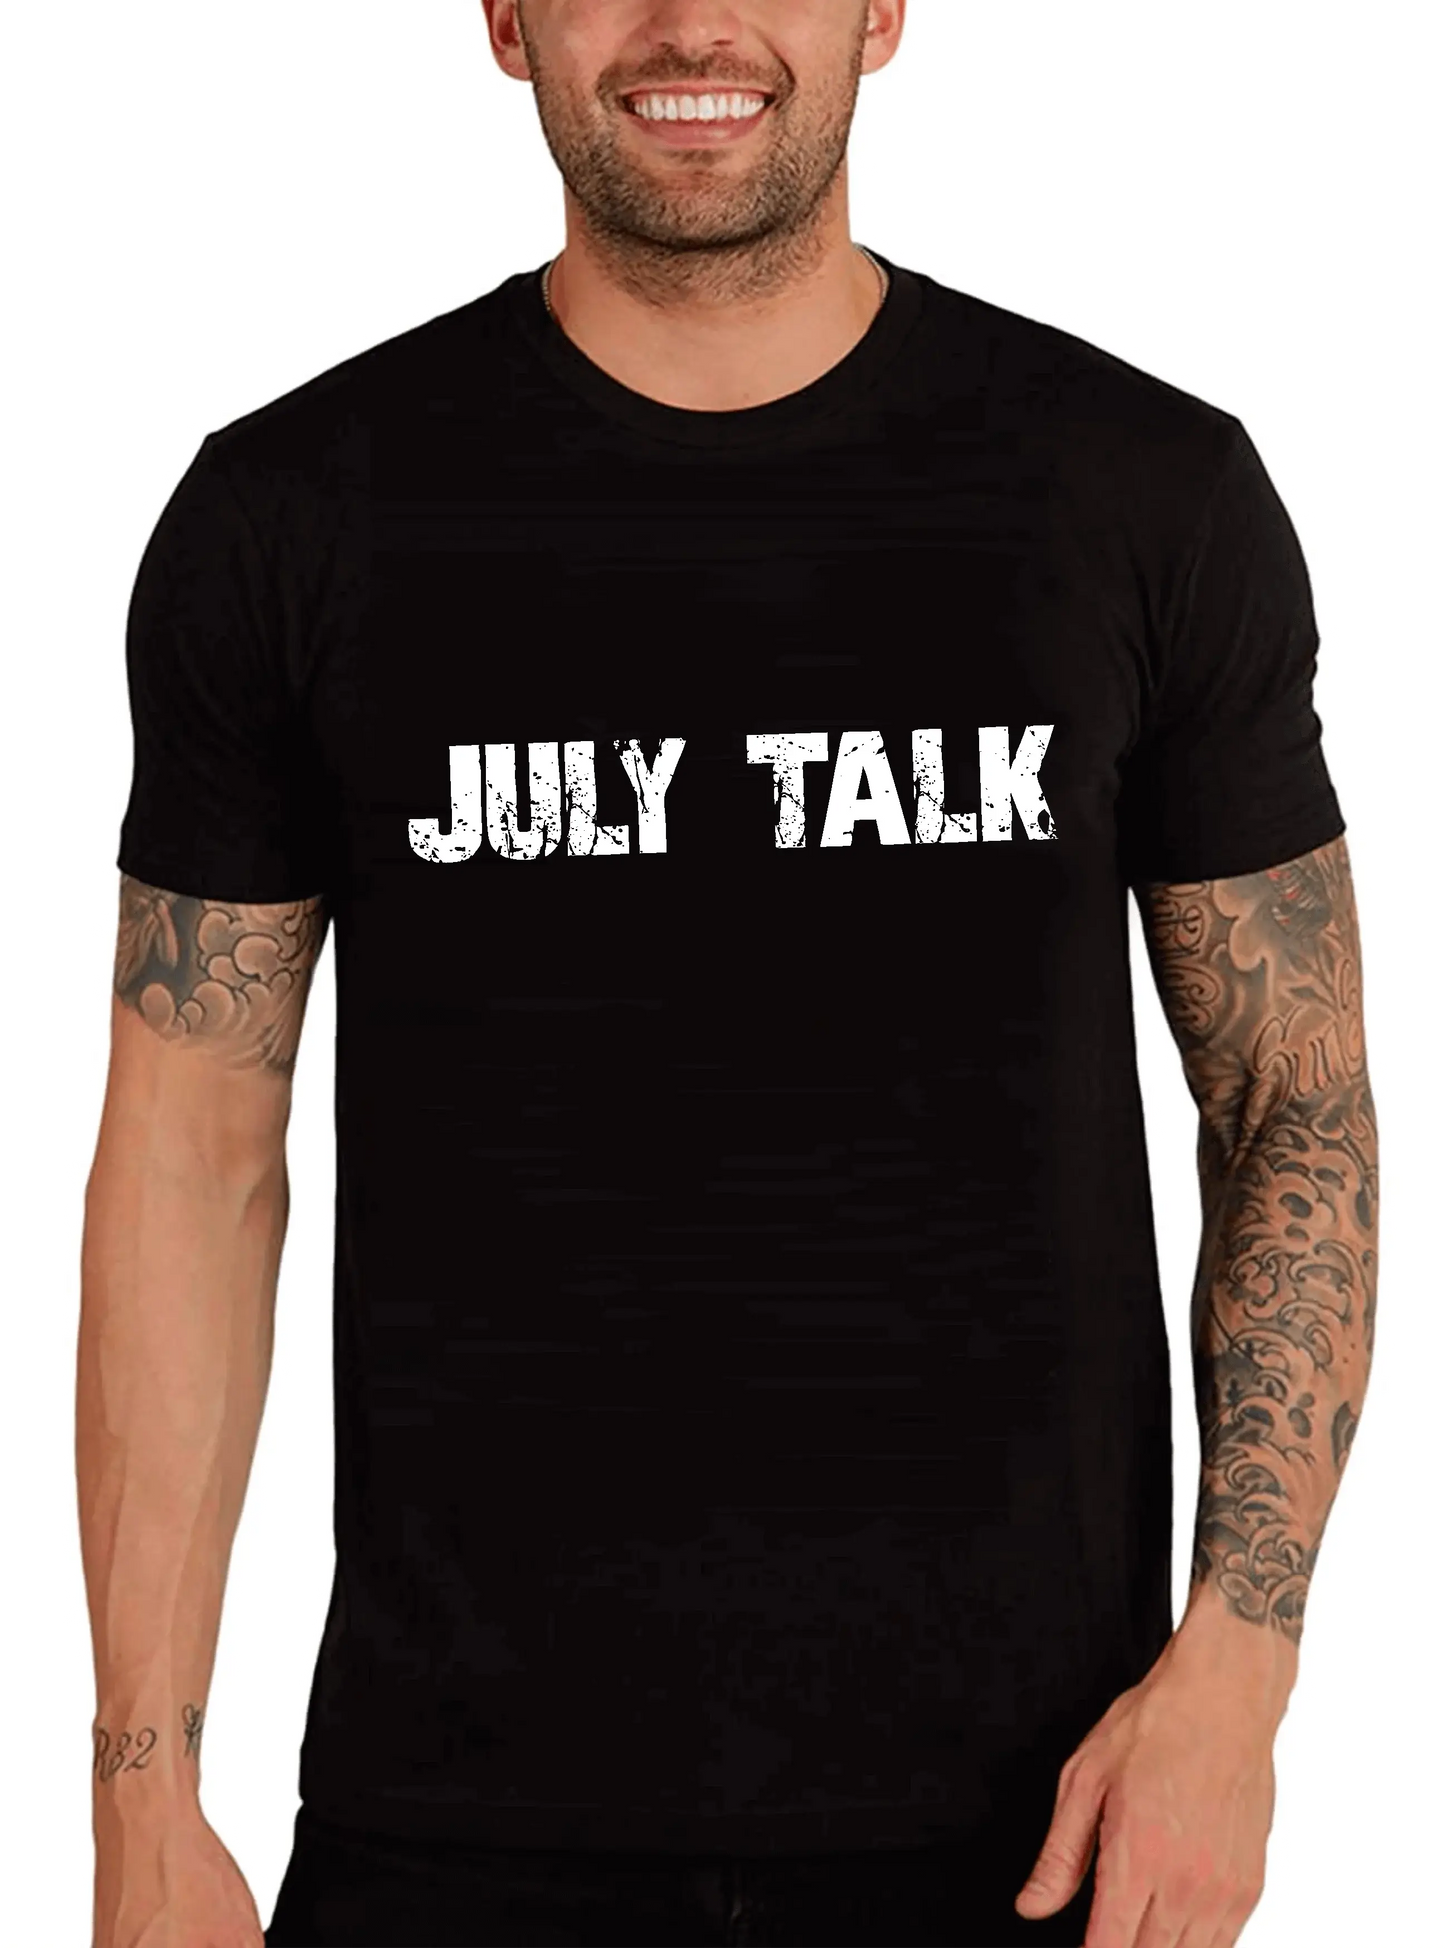 Men's Graphic T-Shirt July Talk Eco-Friendly Limited Edition Short Sleeve Tee-Shirt Vintage Birthday Gift Novelty